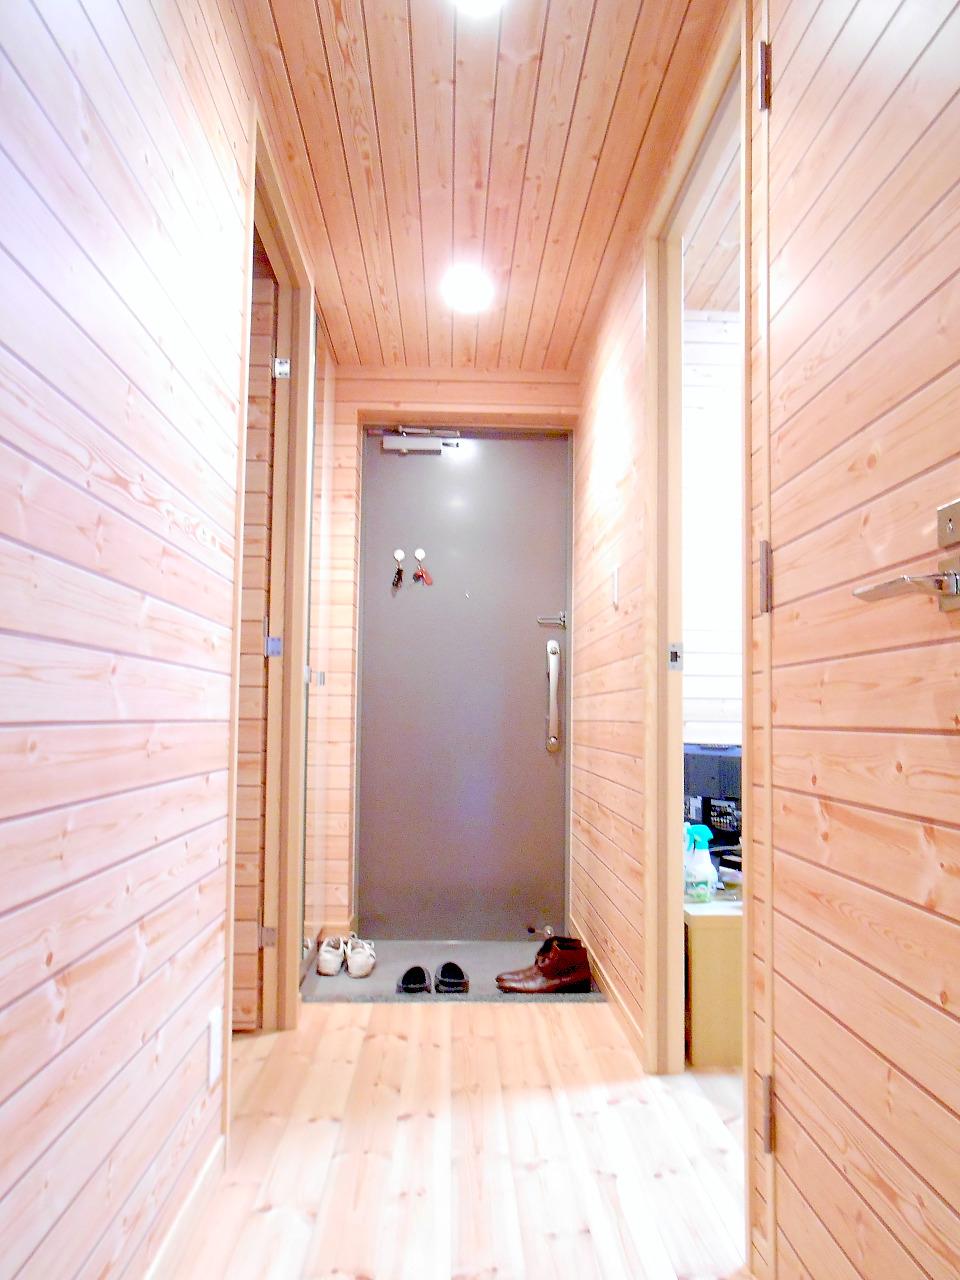 Other introspection. Room with solid wood! It is very beautiful.